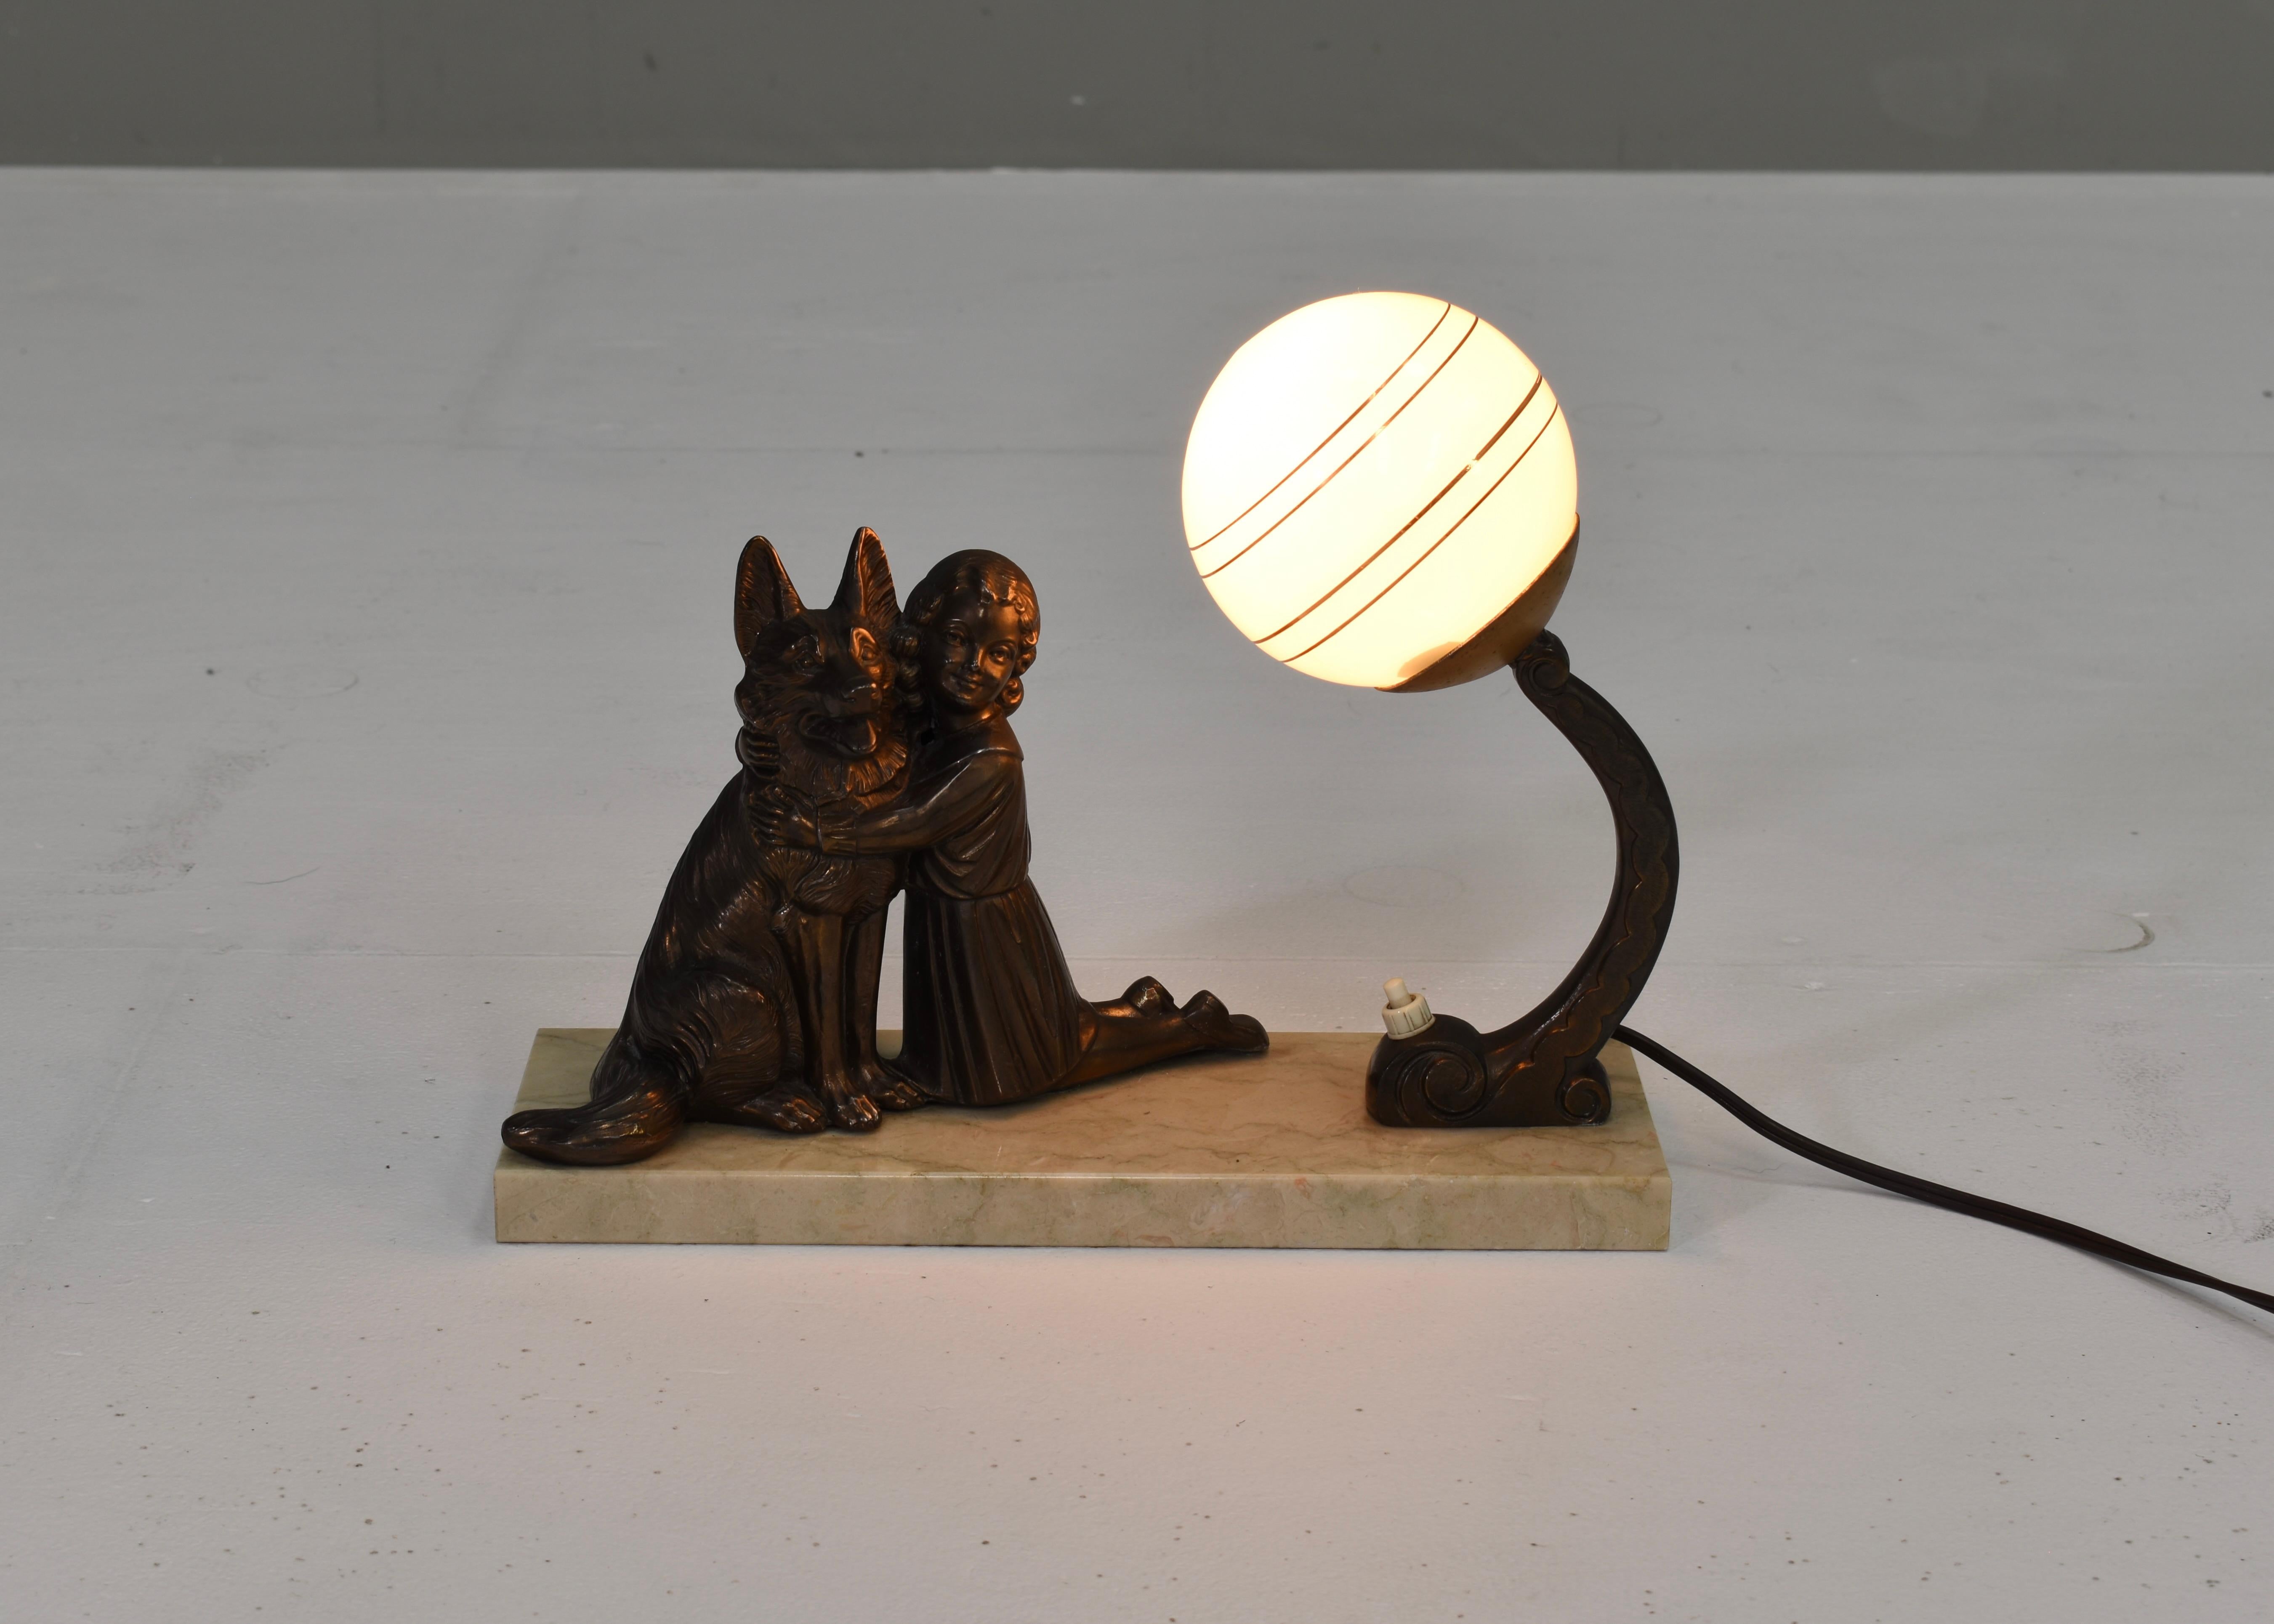 French Art Deco Desk Table Lamp Girl and German Shepherd Sculpture, circa 1930 For Sale 1